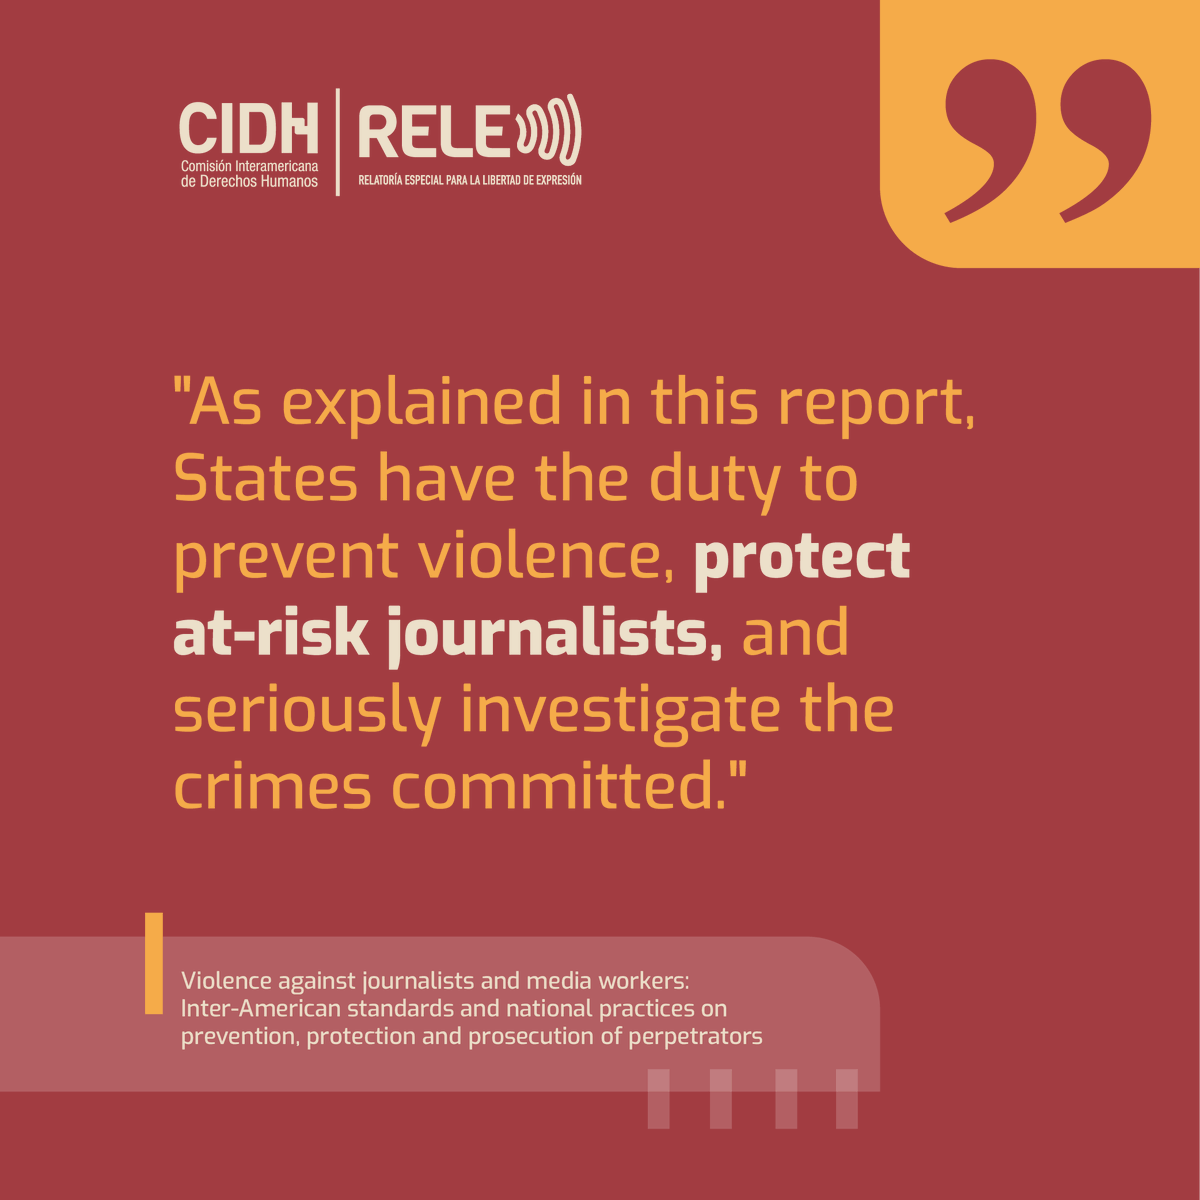 Investigations for aggressions against the press must be carried out expeditiously, avoiding unjustified delays that lead to impunity. #RELECIDH oas.org/es/cidh/expres…